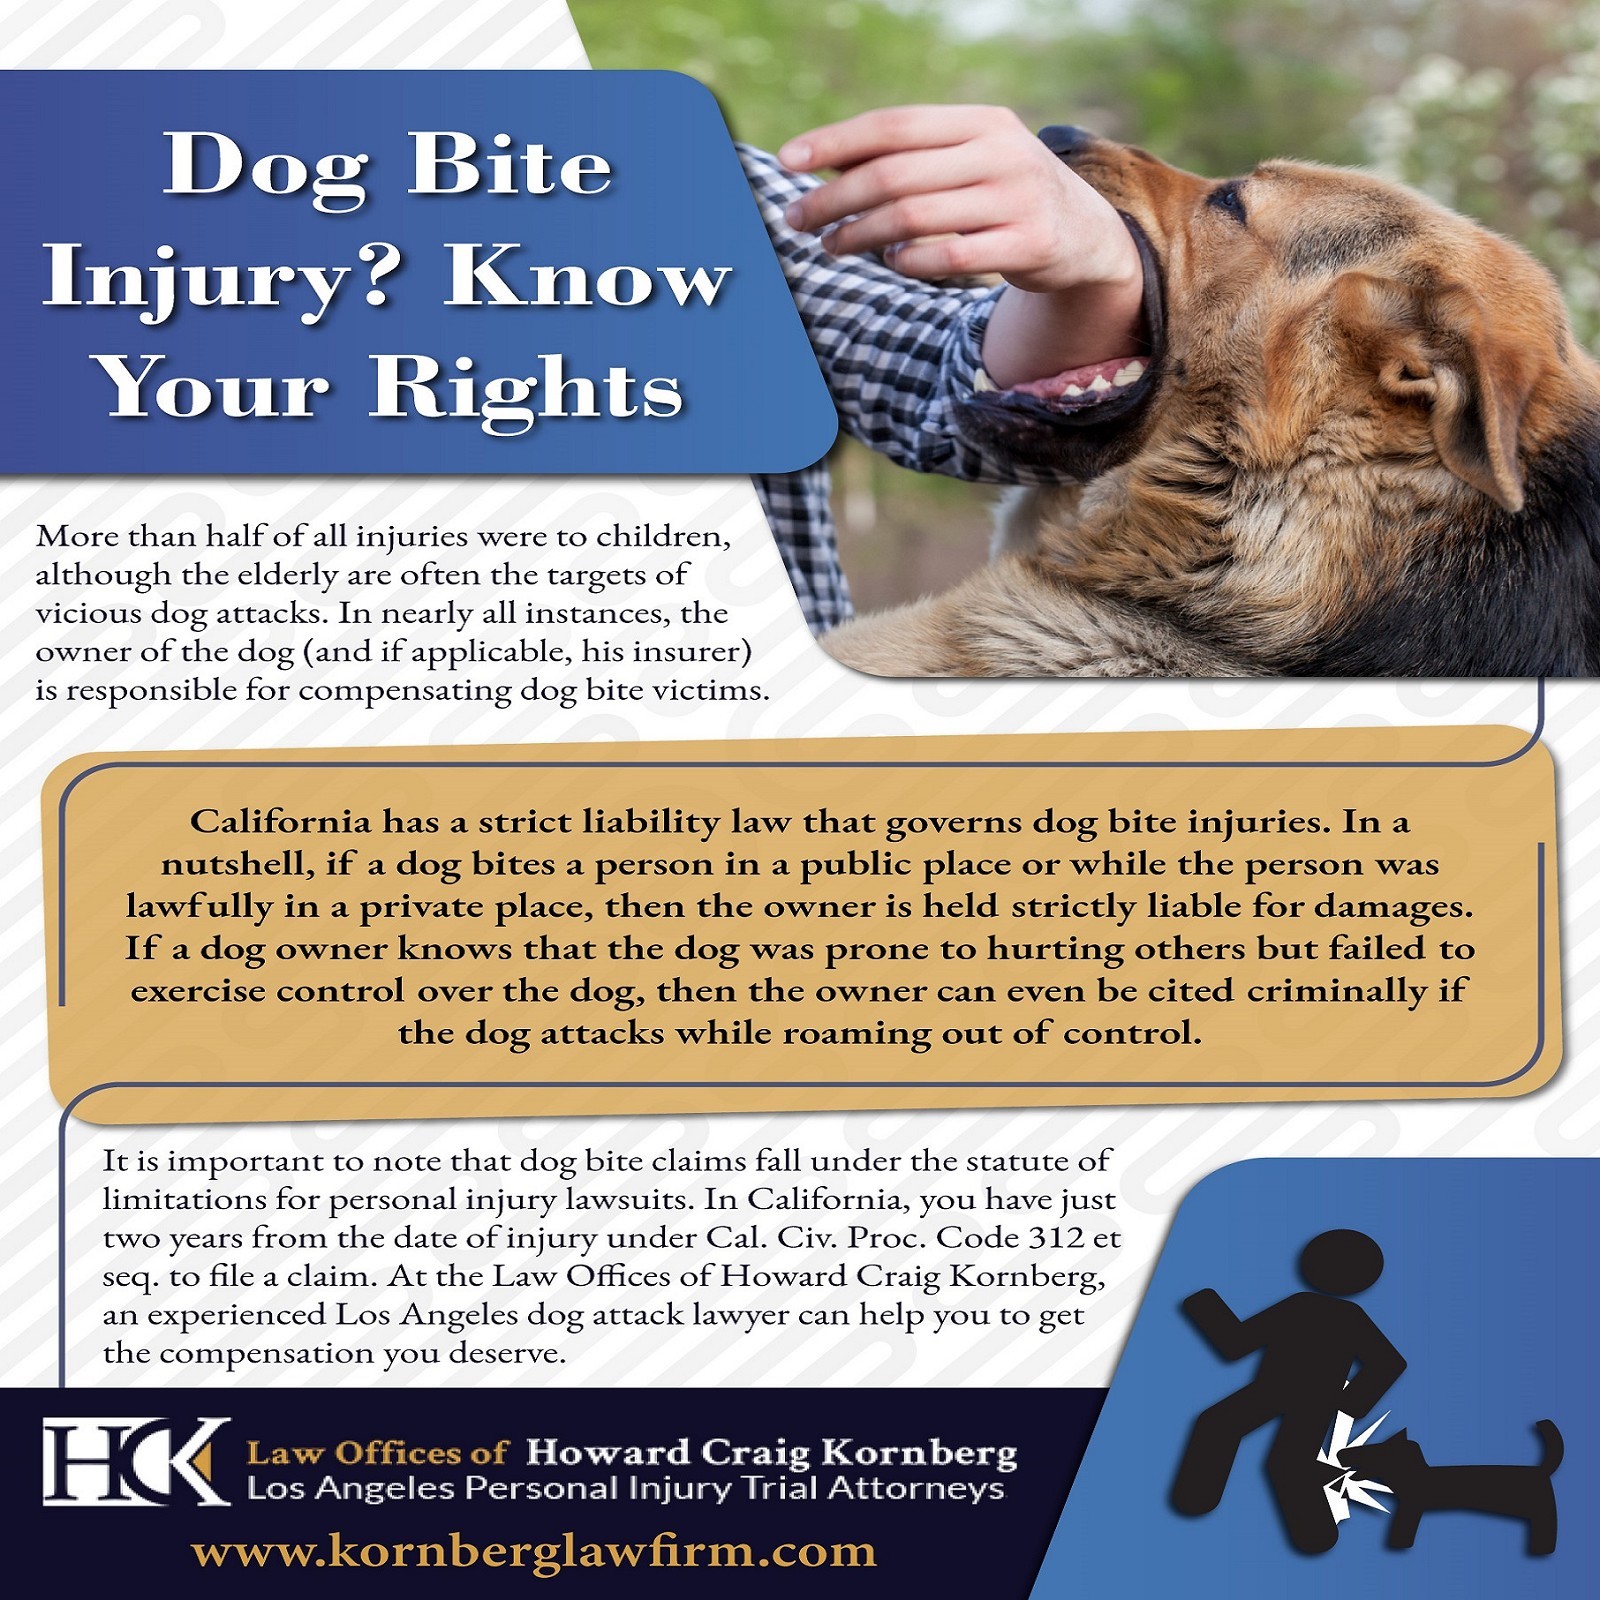 Dog Bite Injury? Know Your Rights